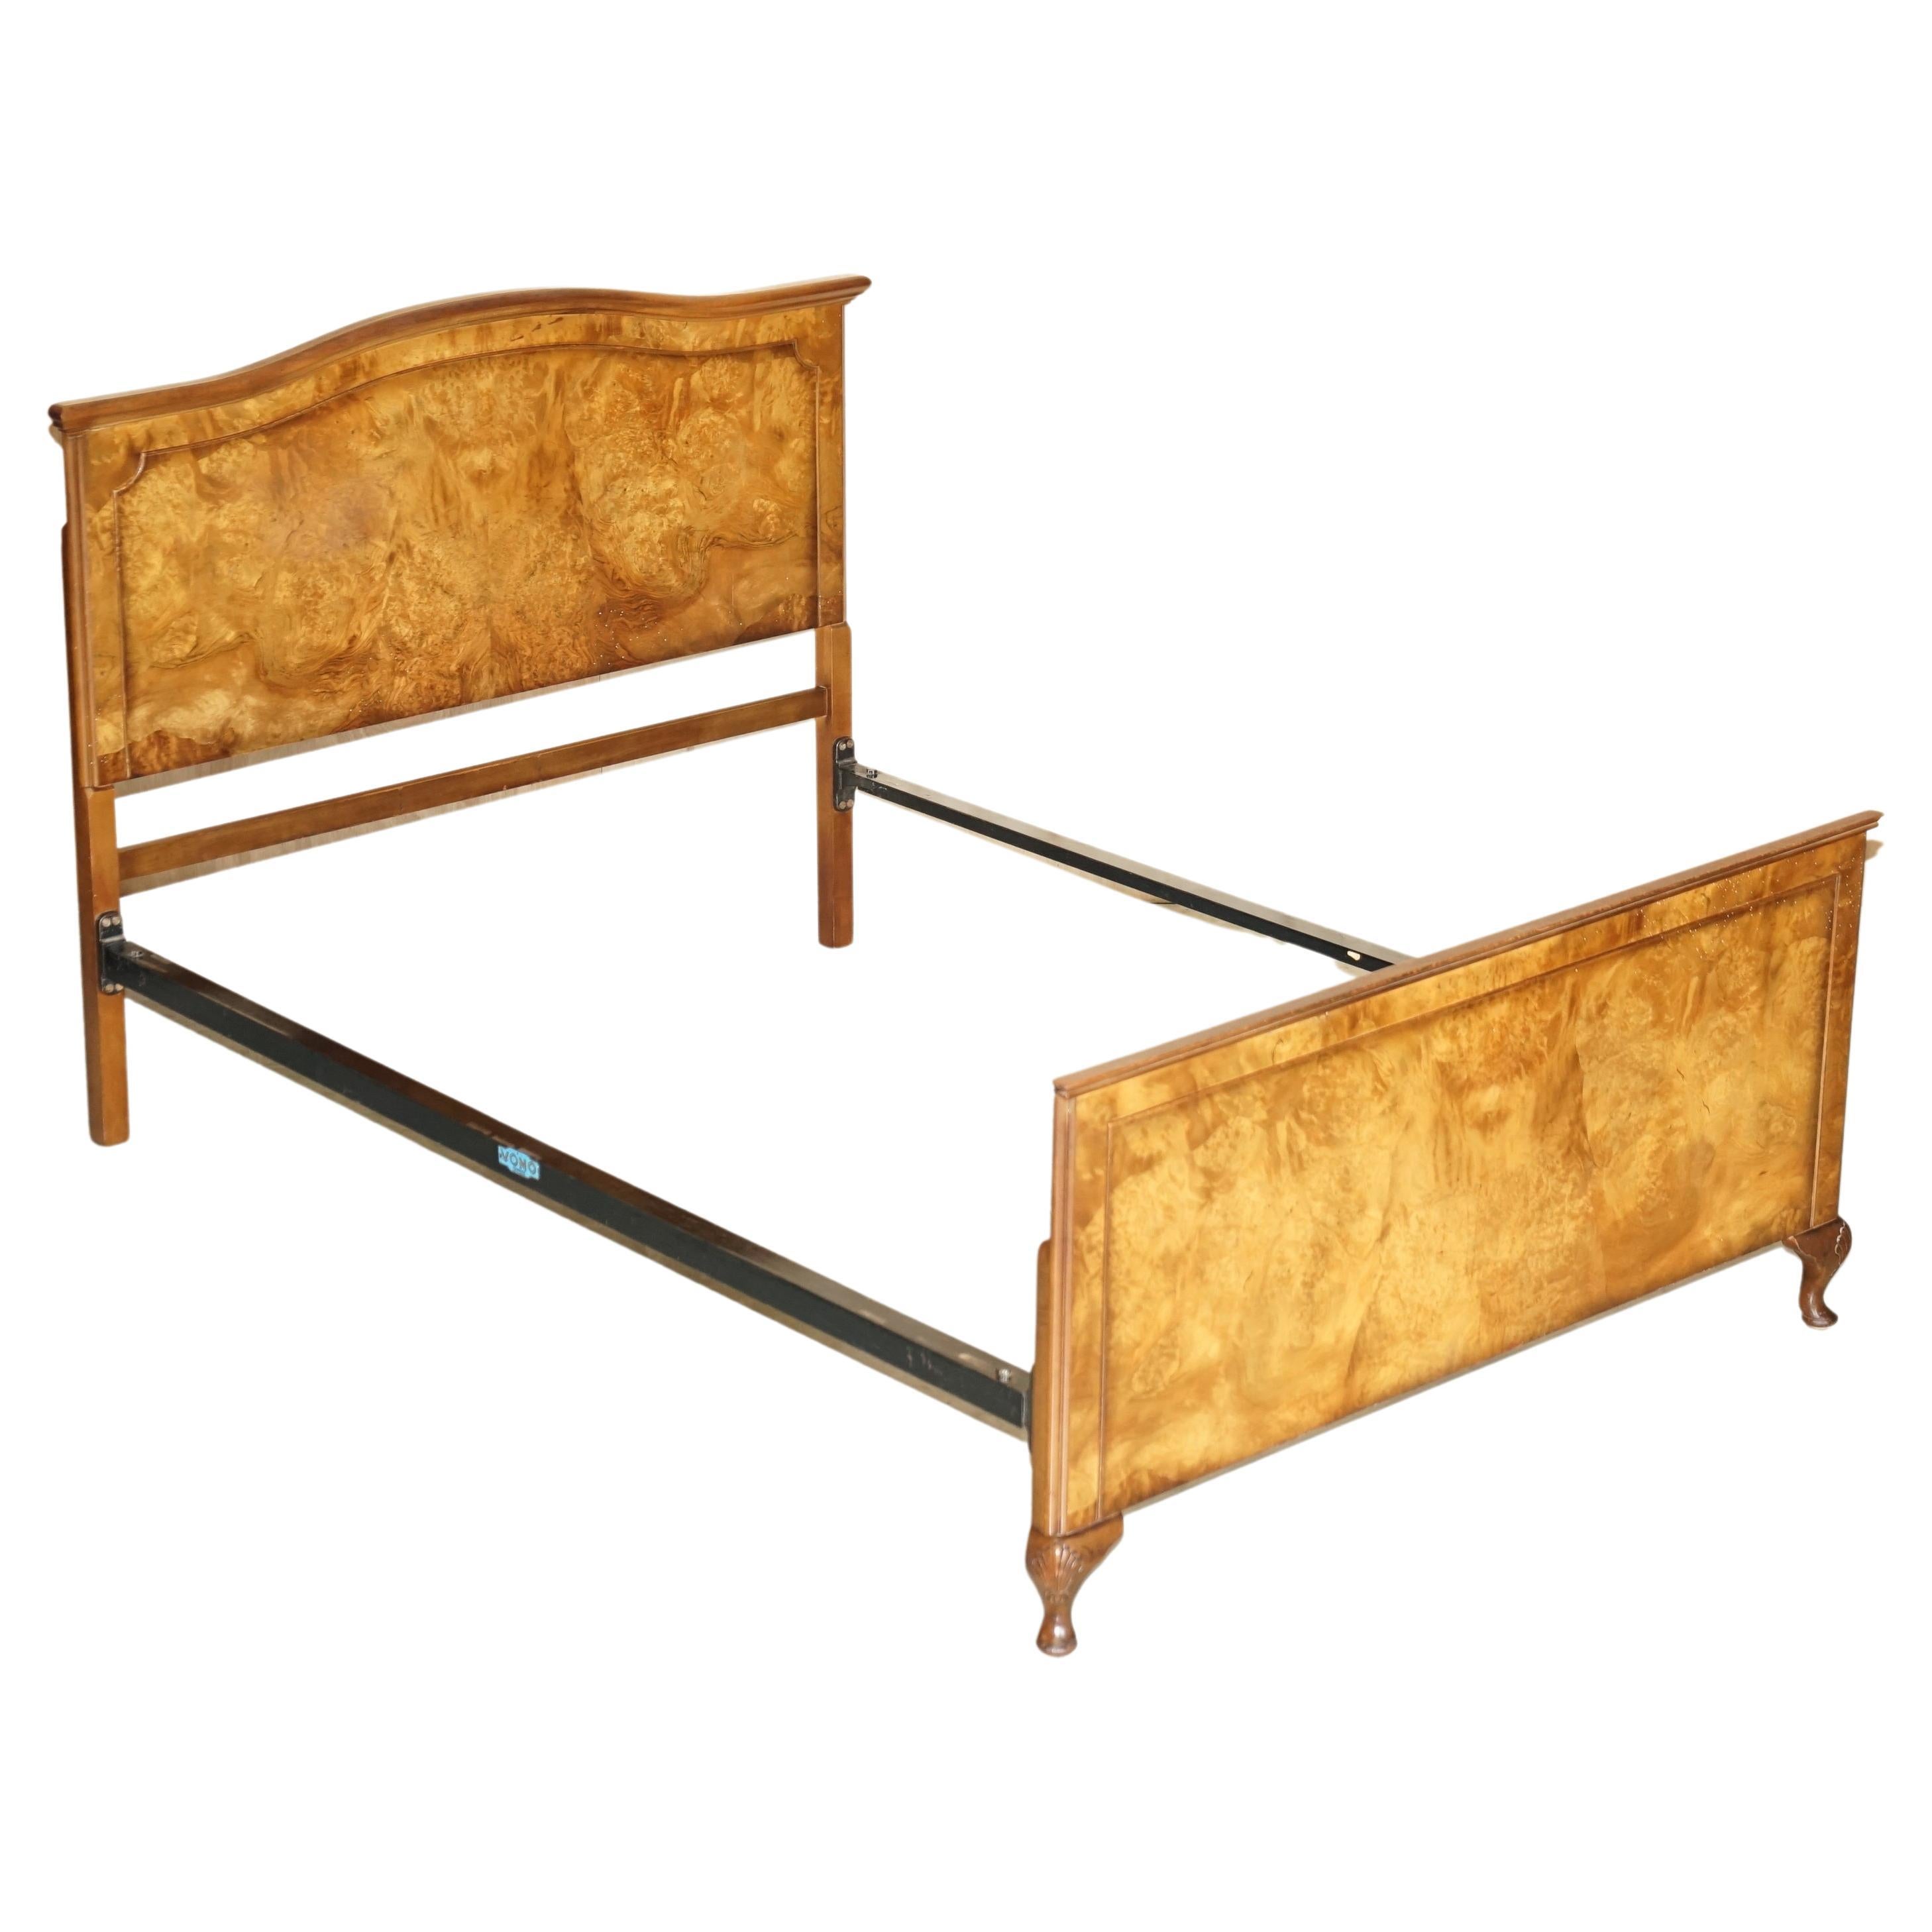 Stunning Double Sized circa 1900 Burr Walnut English Bedstead Frame Part Suite For Sale